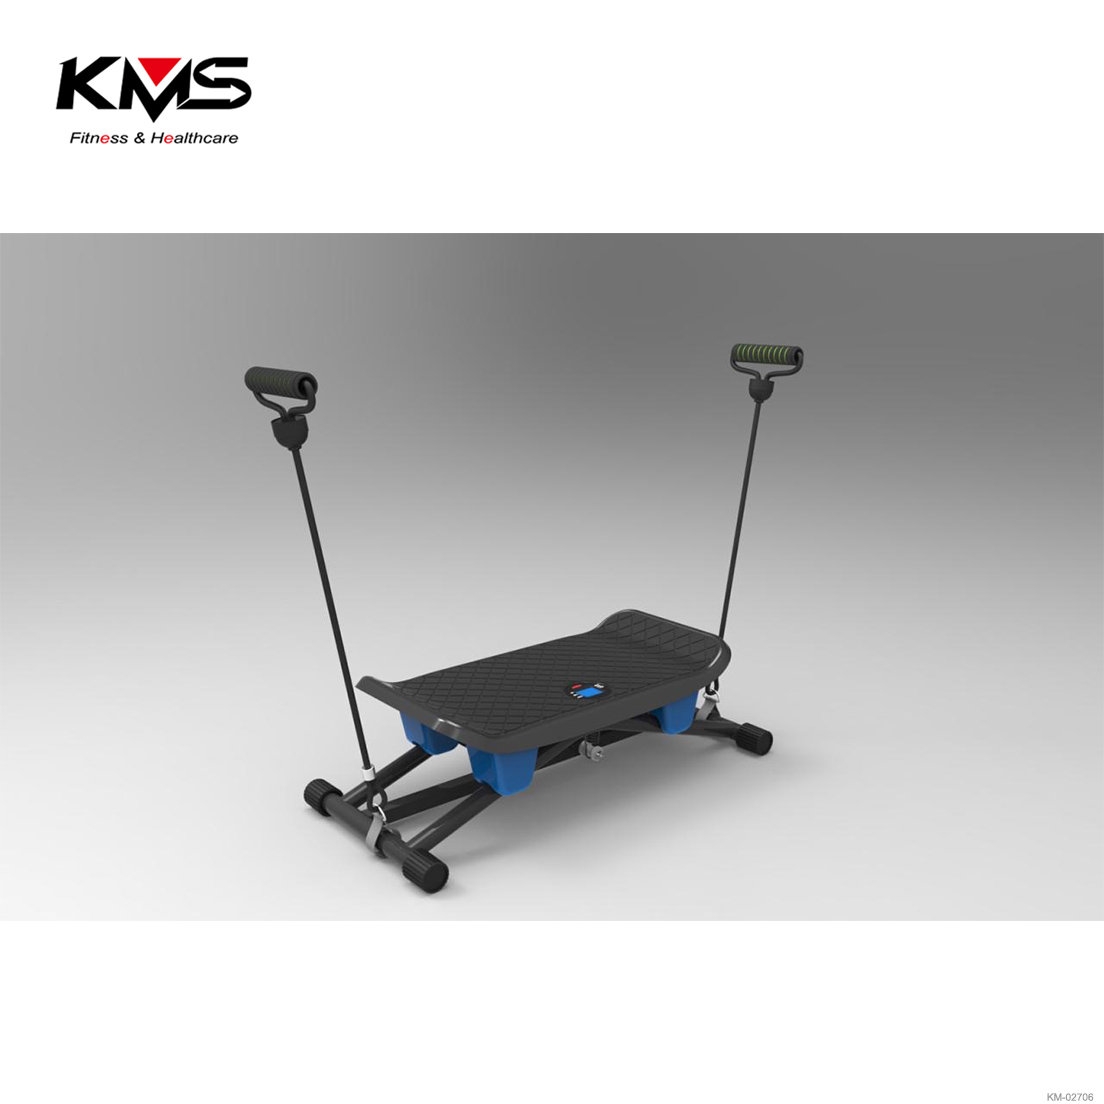 High-Quality Weight Bench and Weight Set for Home Workouts